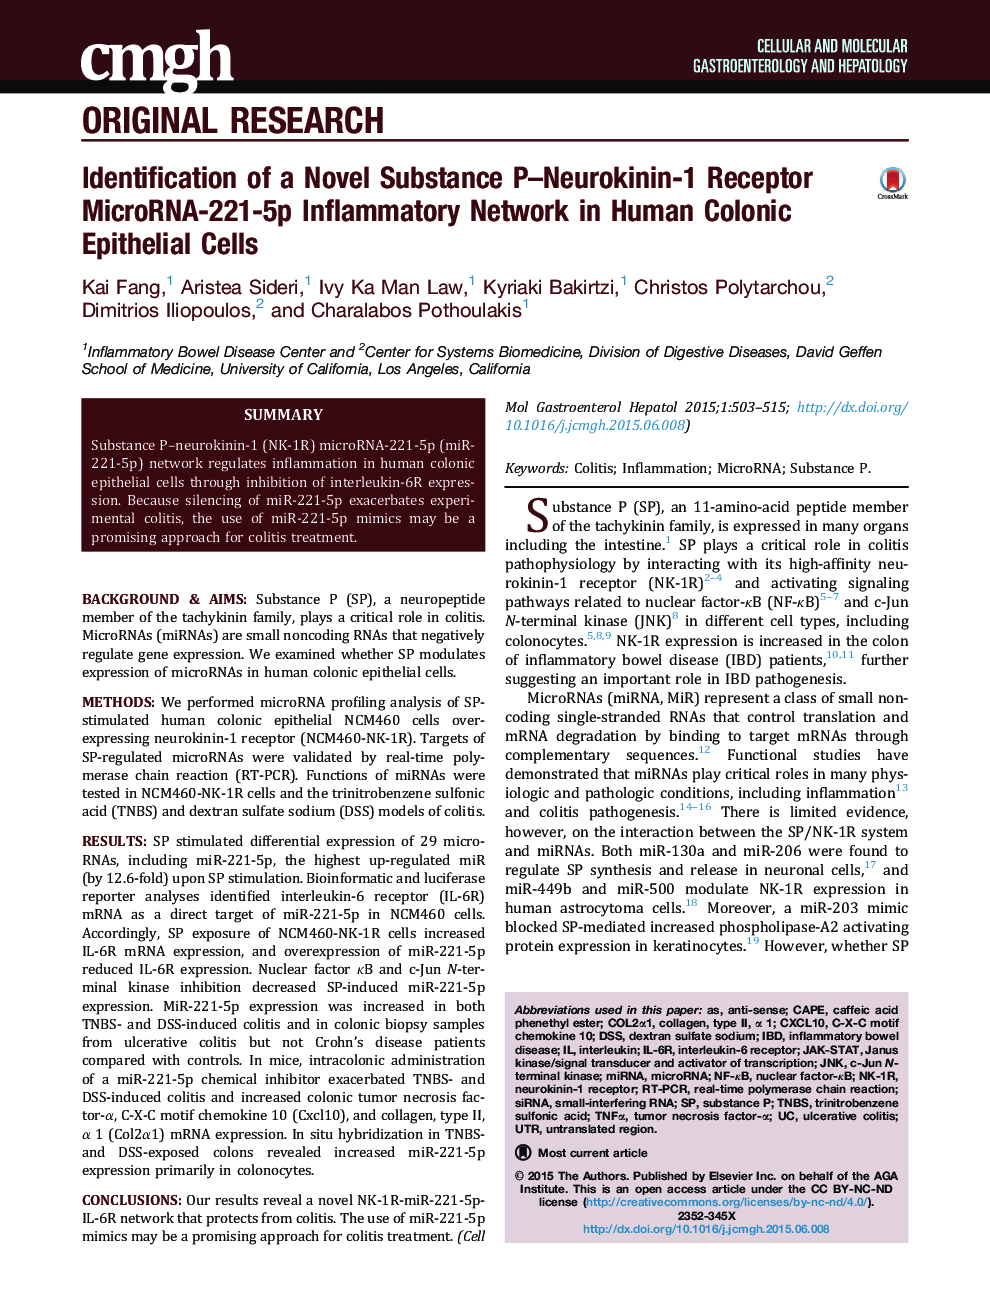 Identification of a Novel Substance P–Neurokinin-1 Receptor MicroRNA-221-5p Inflammatory Network in Human Colonic Epithelial Cells 